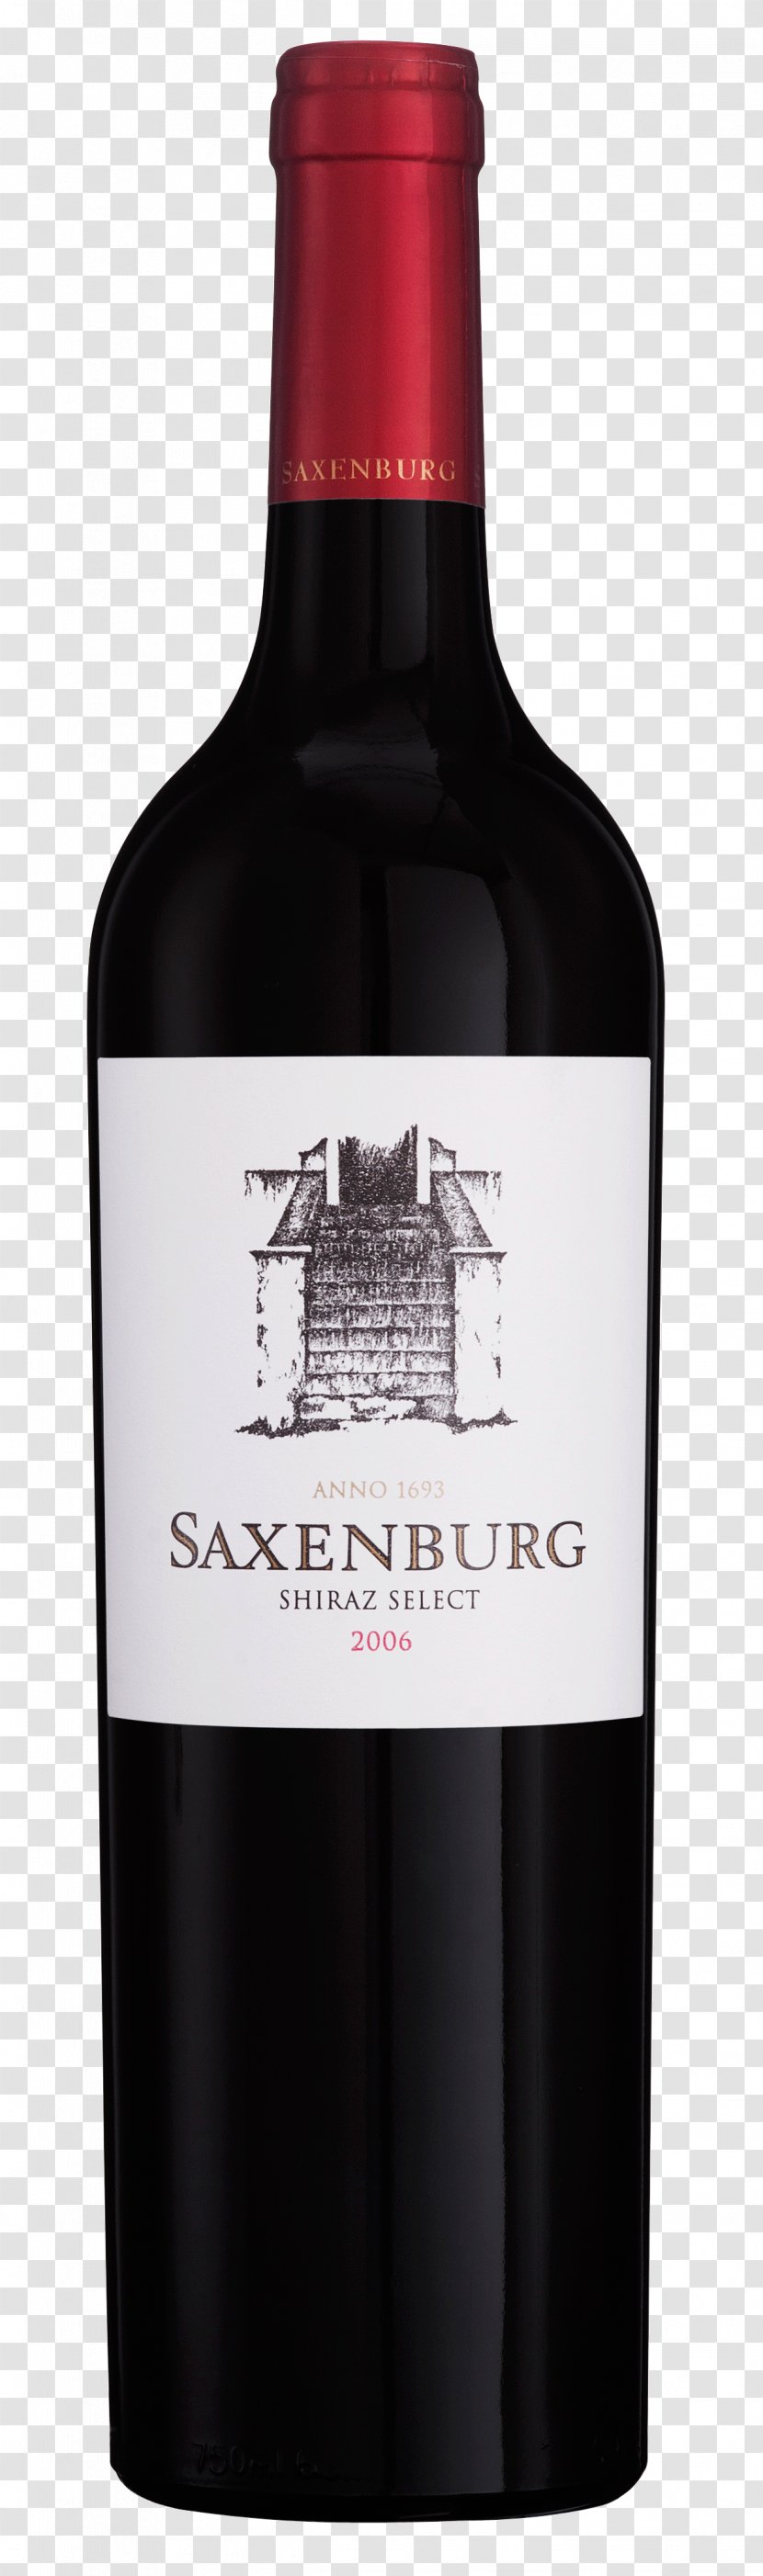 Shiraz Red Wine Stellenbosch South African - Pinotage - Names Grapes Transparent PNG